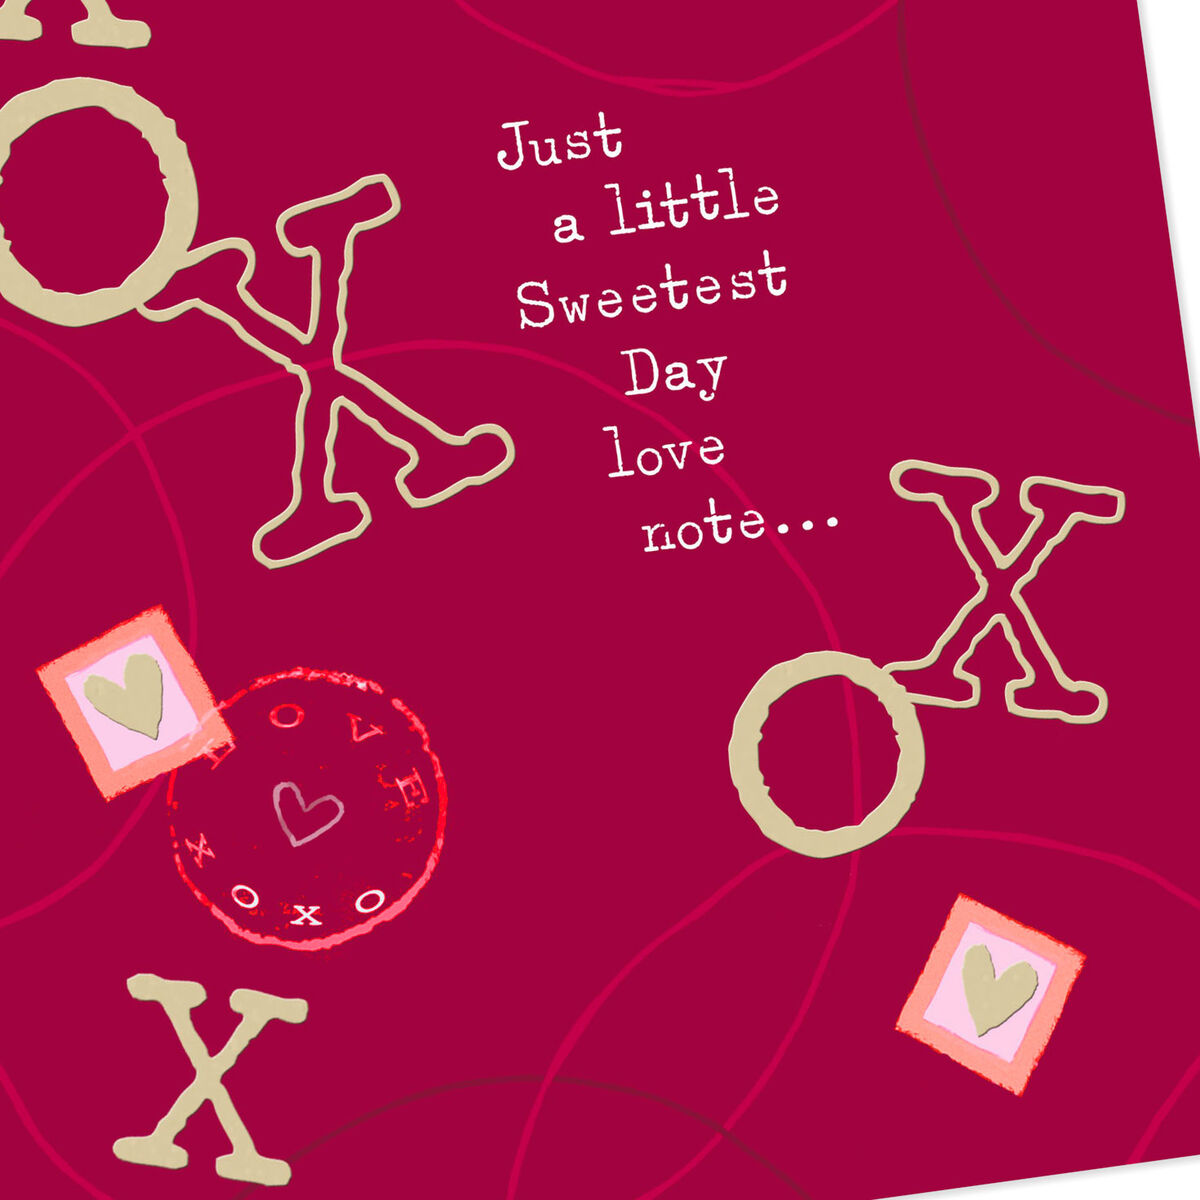 xoxo-love-note-sweetest-day-card-for-husband-greeting-cards-hallmark